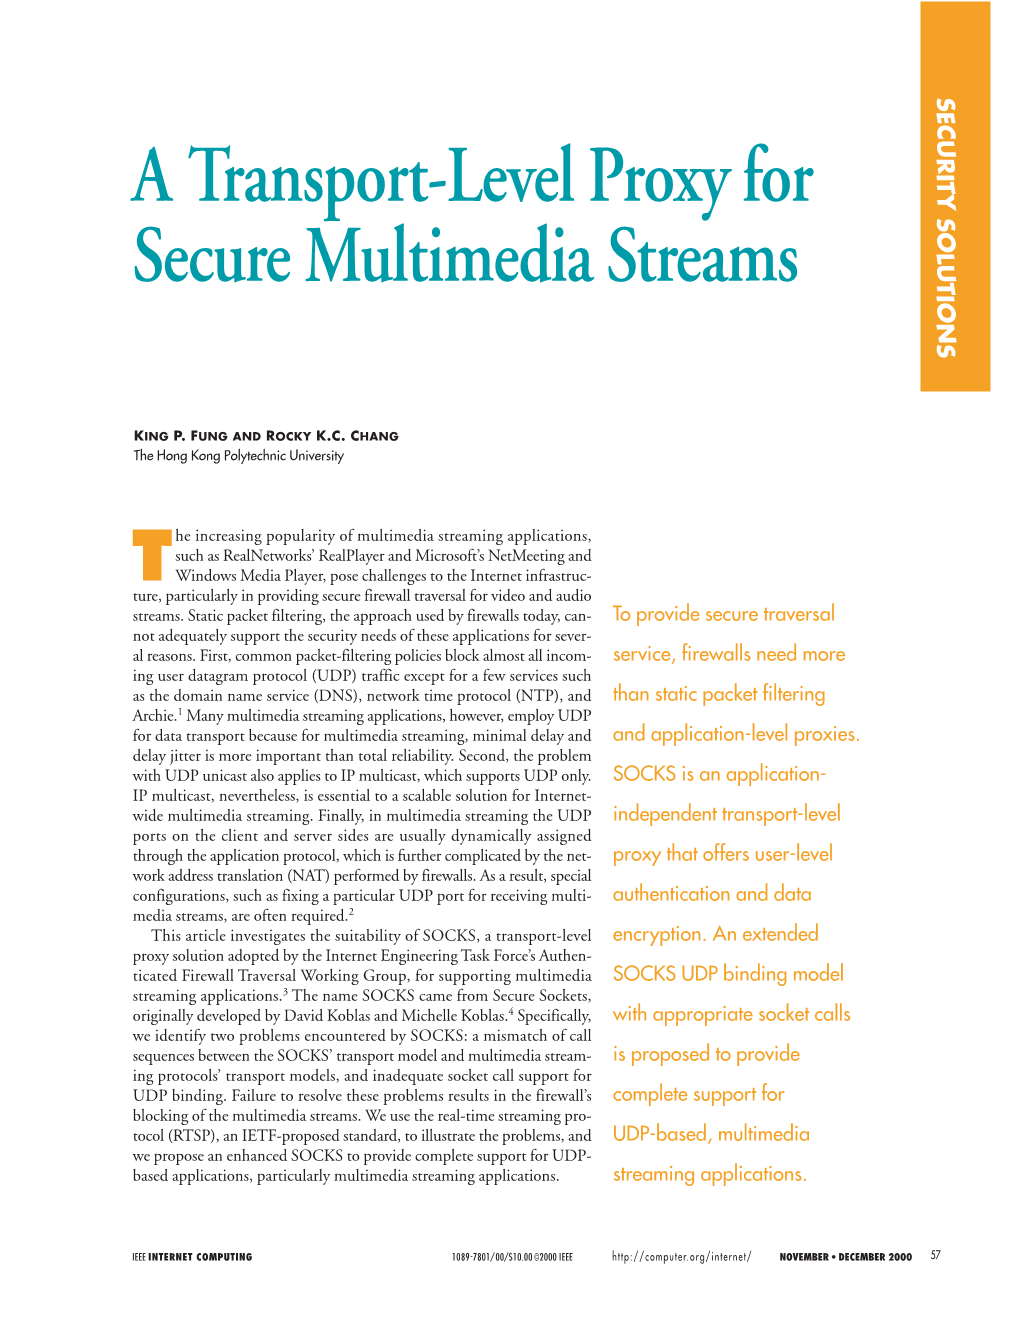 A Transport-Level Proxy for Secure Multimedia Streams